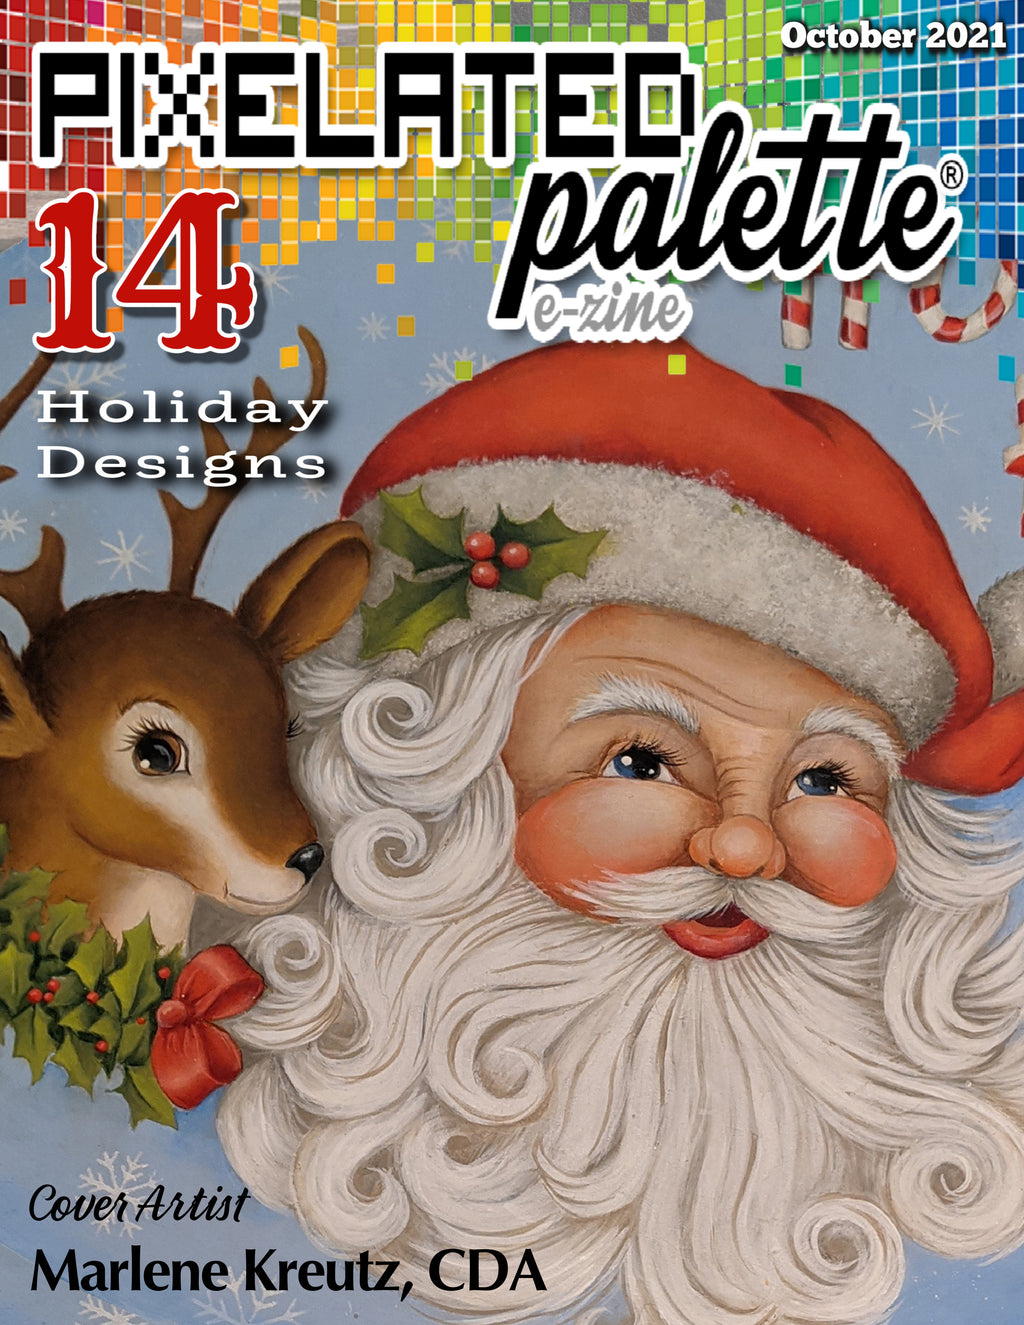 Pixelated Palette - October 2021 Issue Download